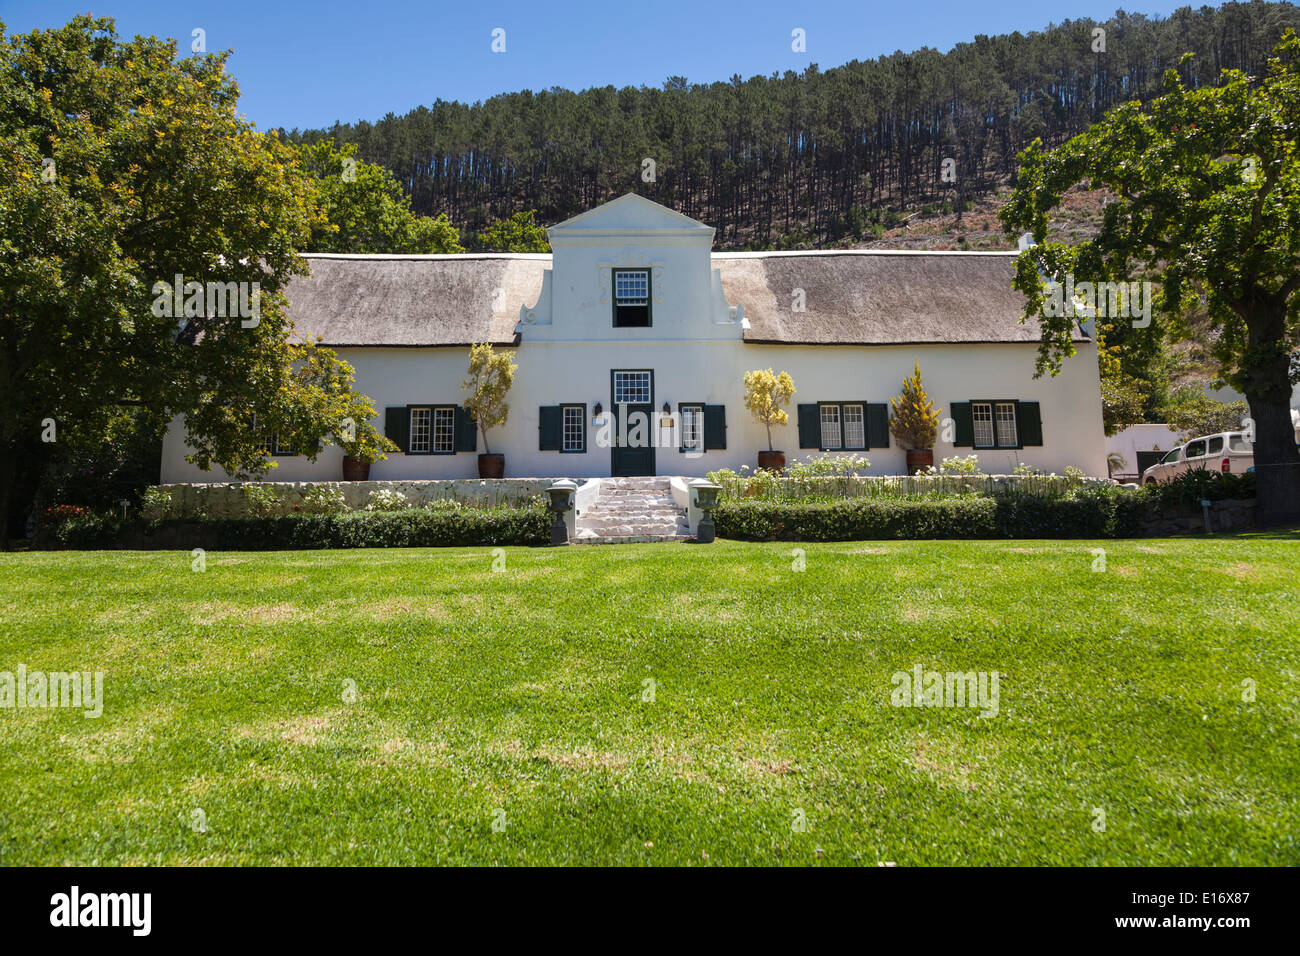 Cape Dutch manor house at Rickety Bridge wine estate, Franschhoek, Cape Winelands, South Africa Stock Photo